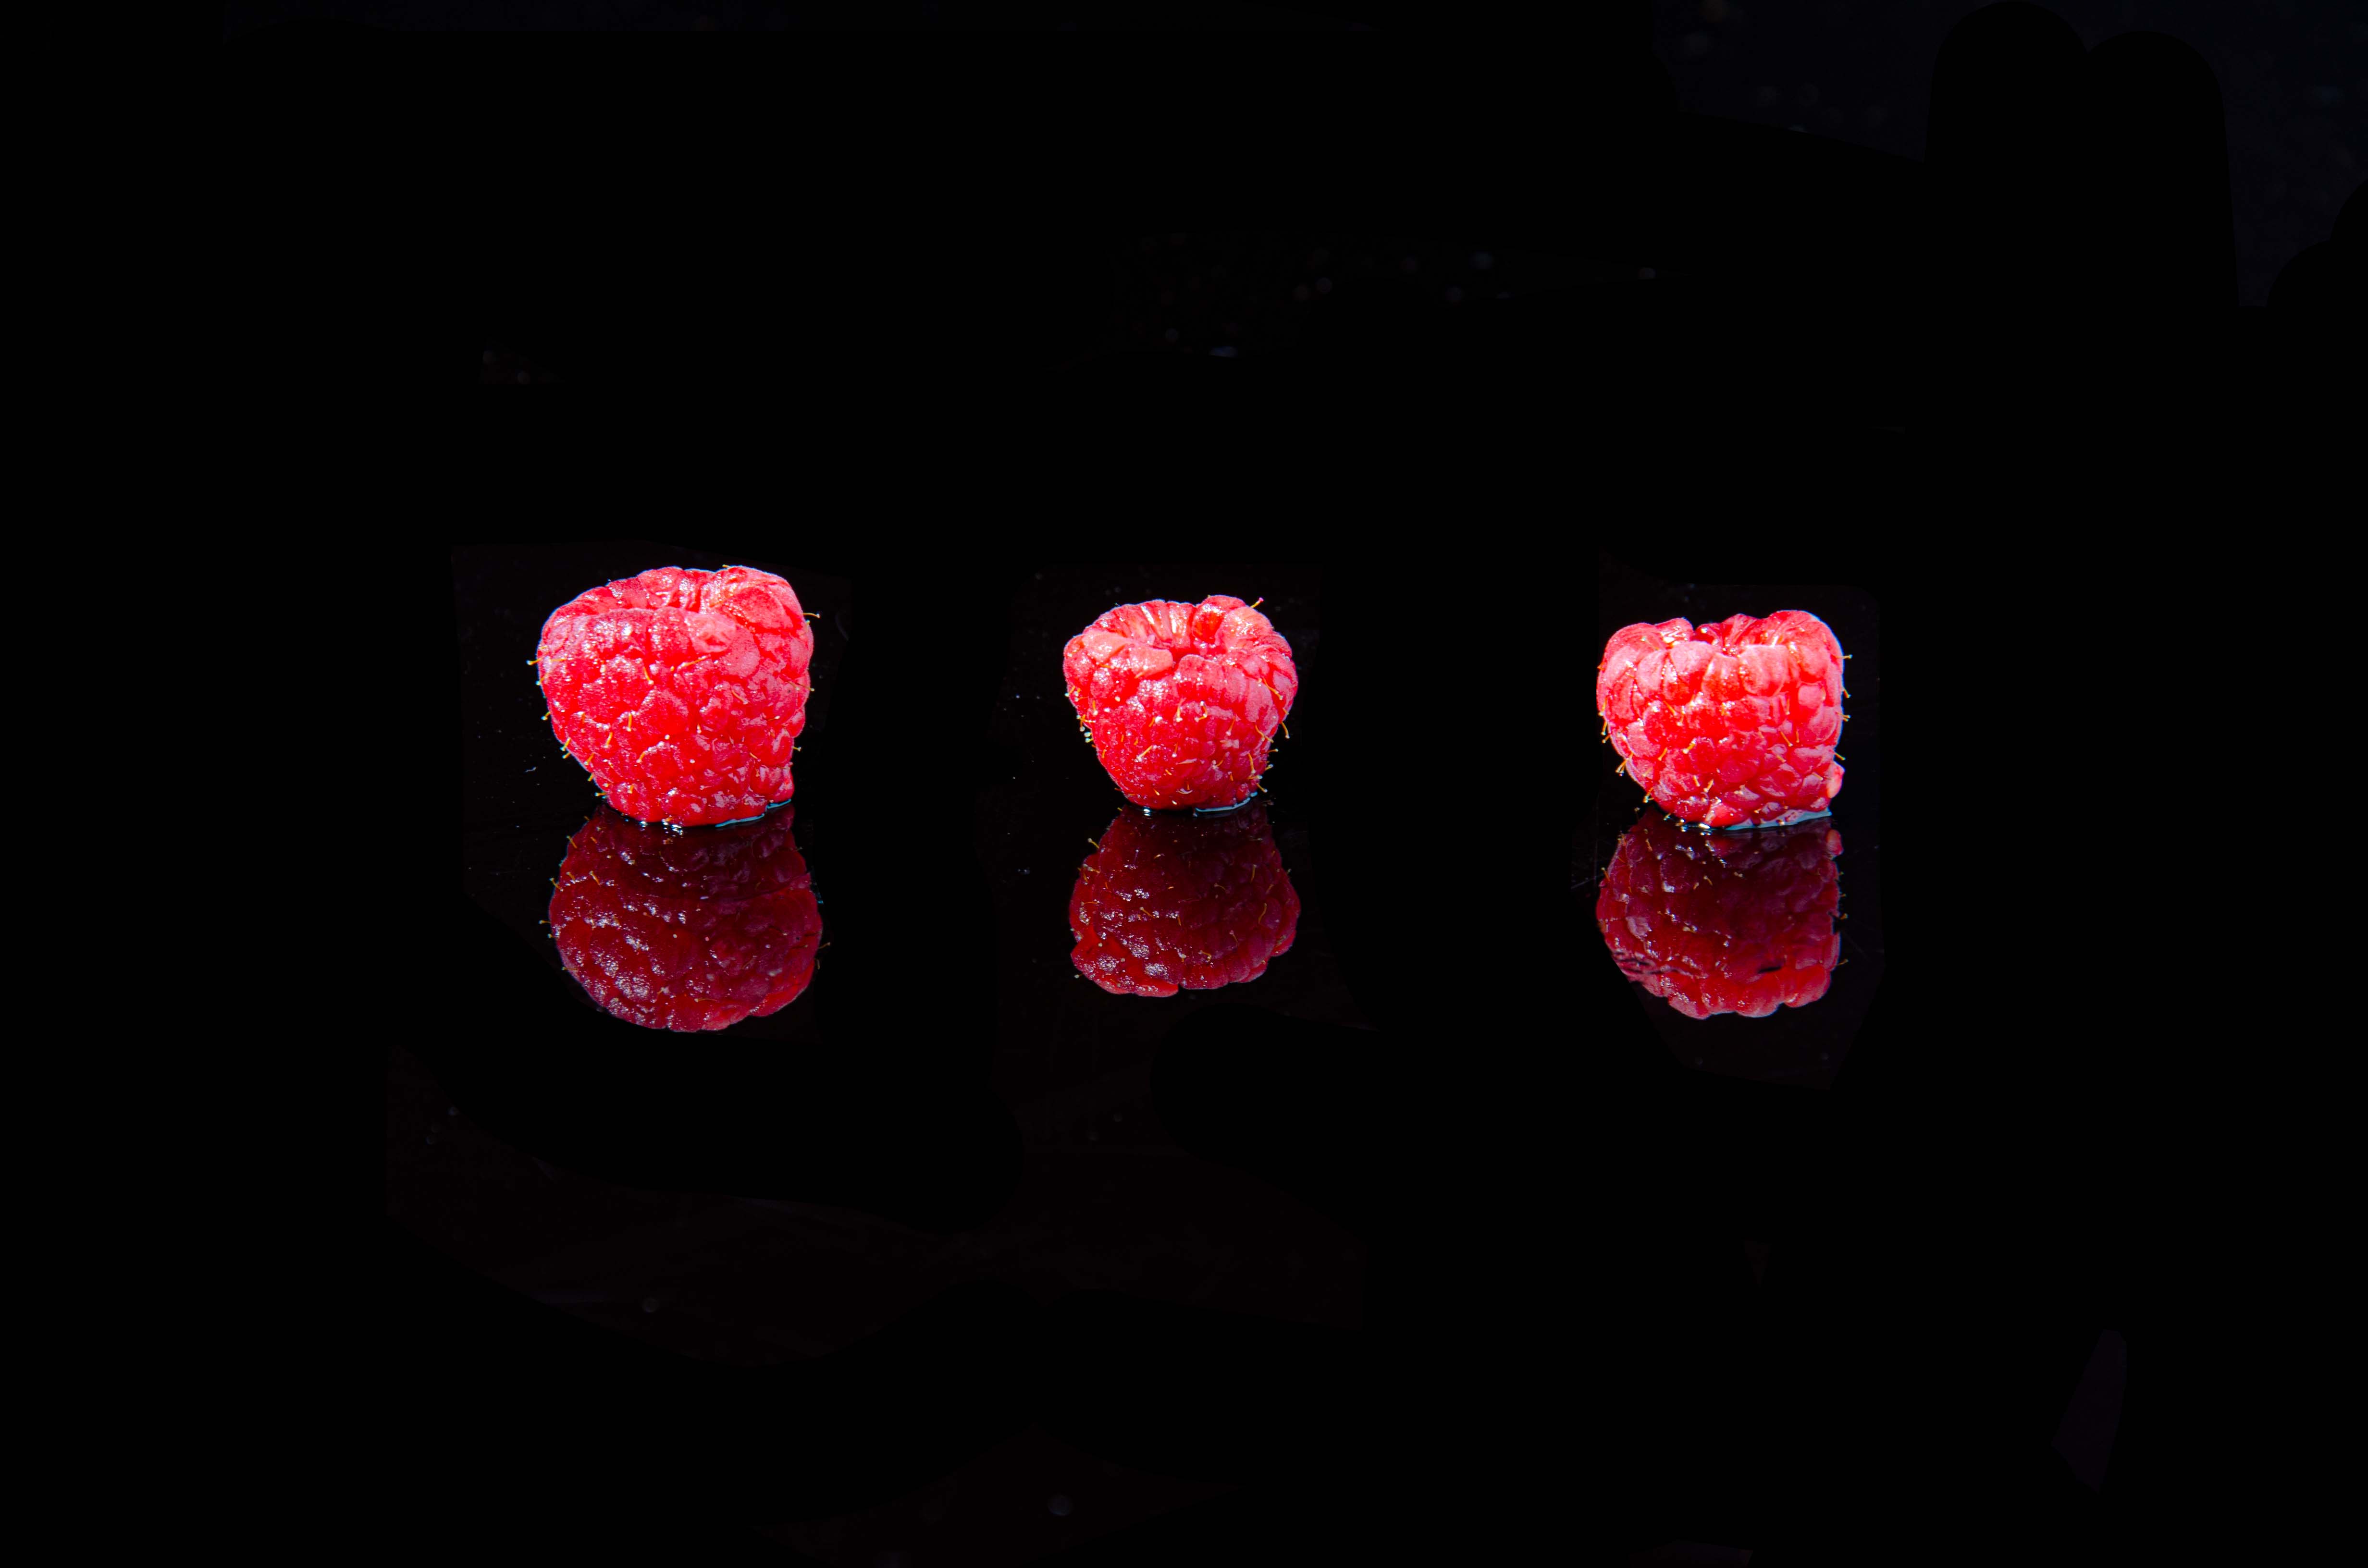 Three rasberries sit in a line on a black reflective table with a black background